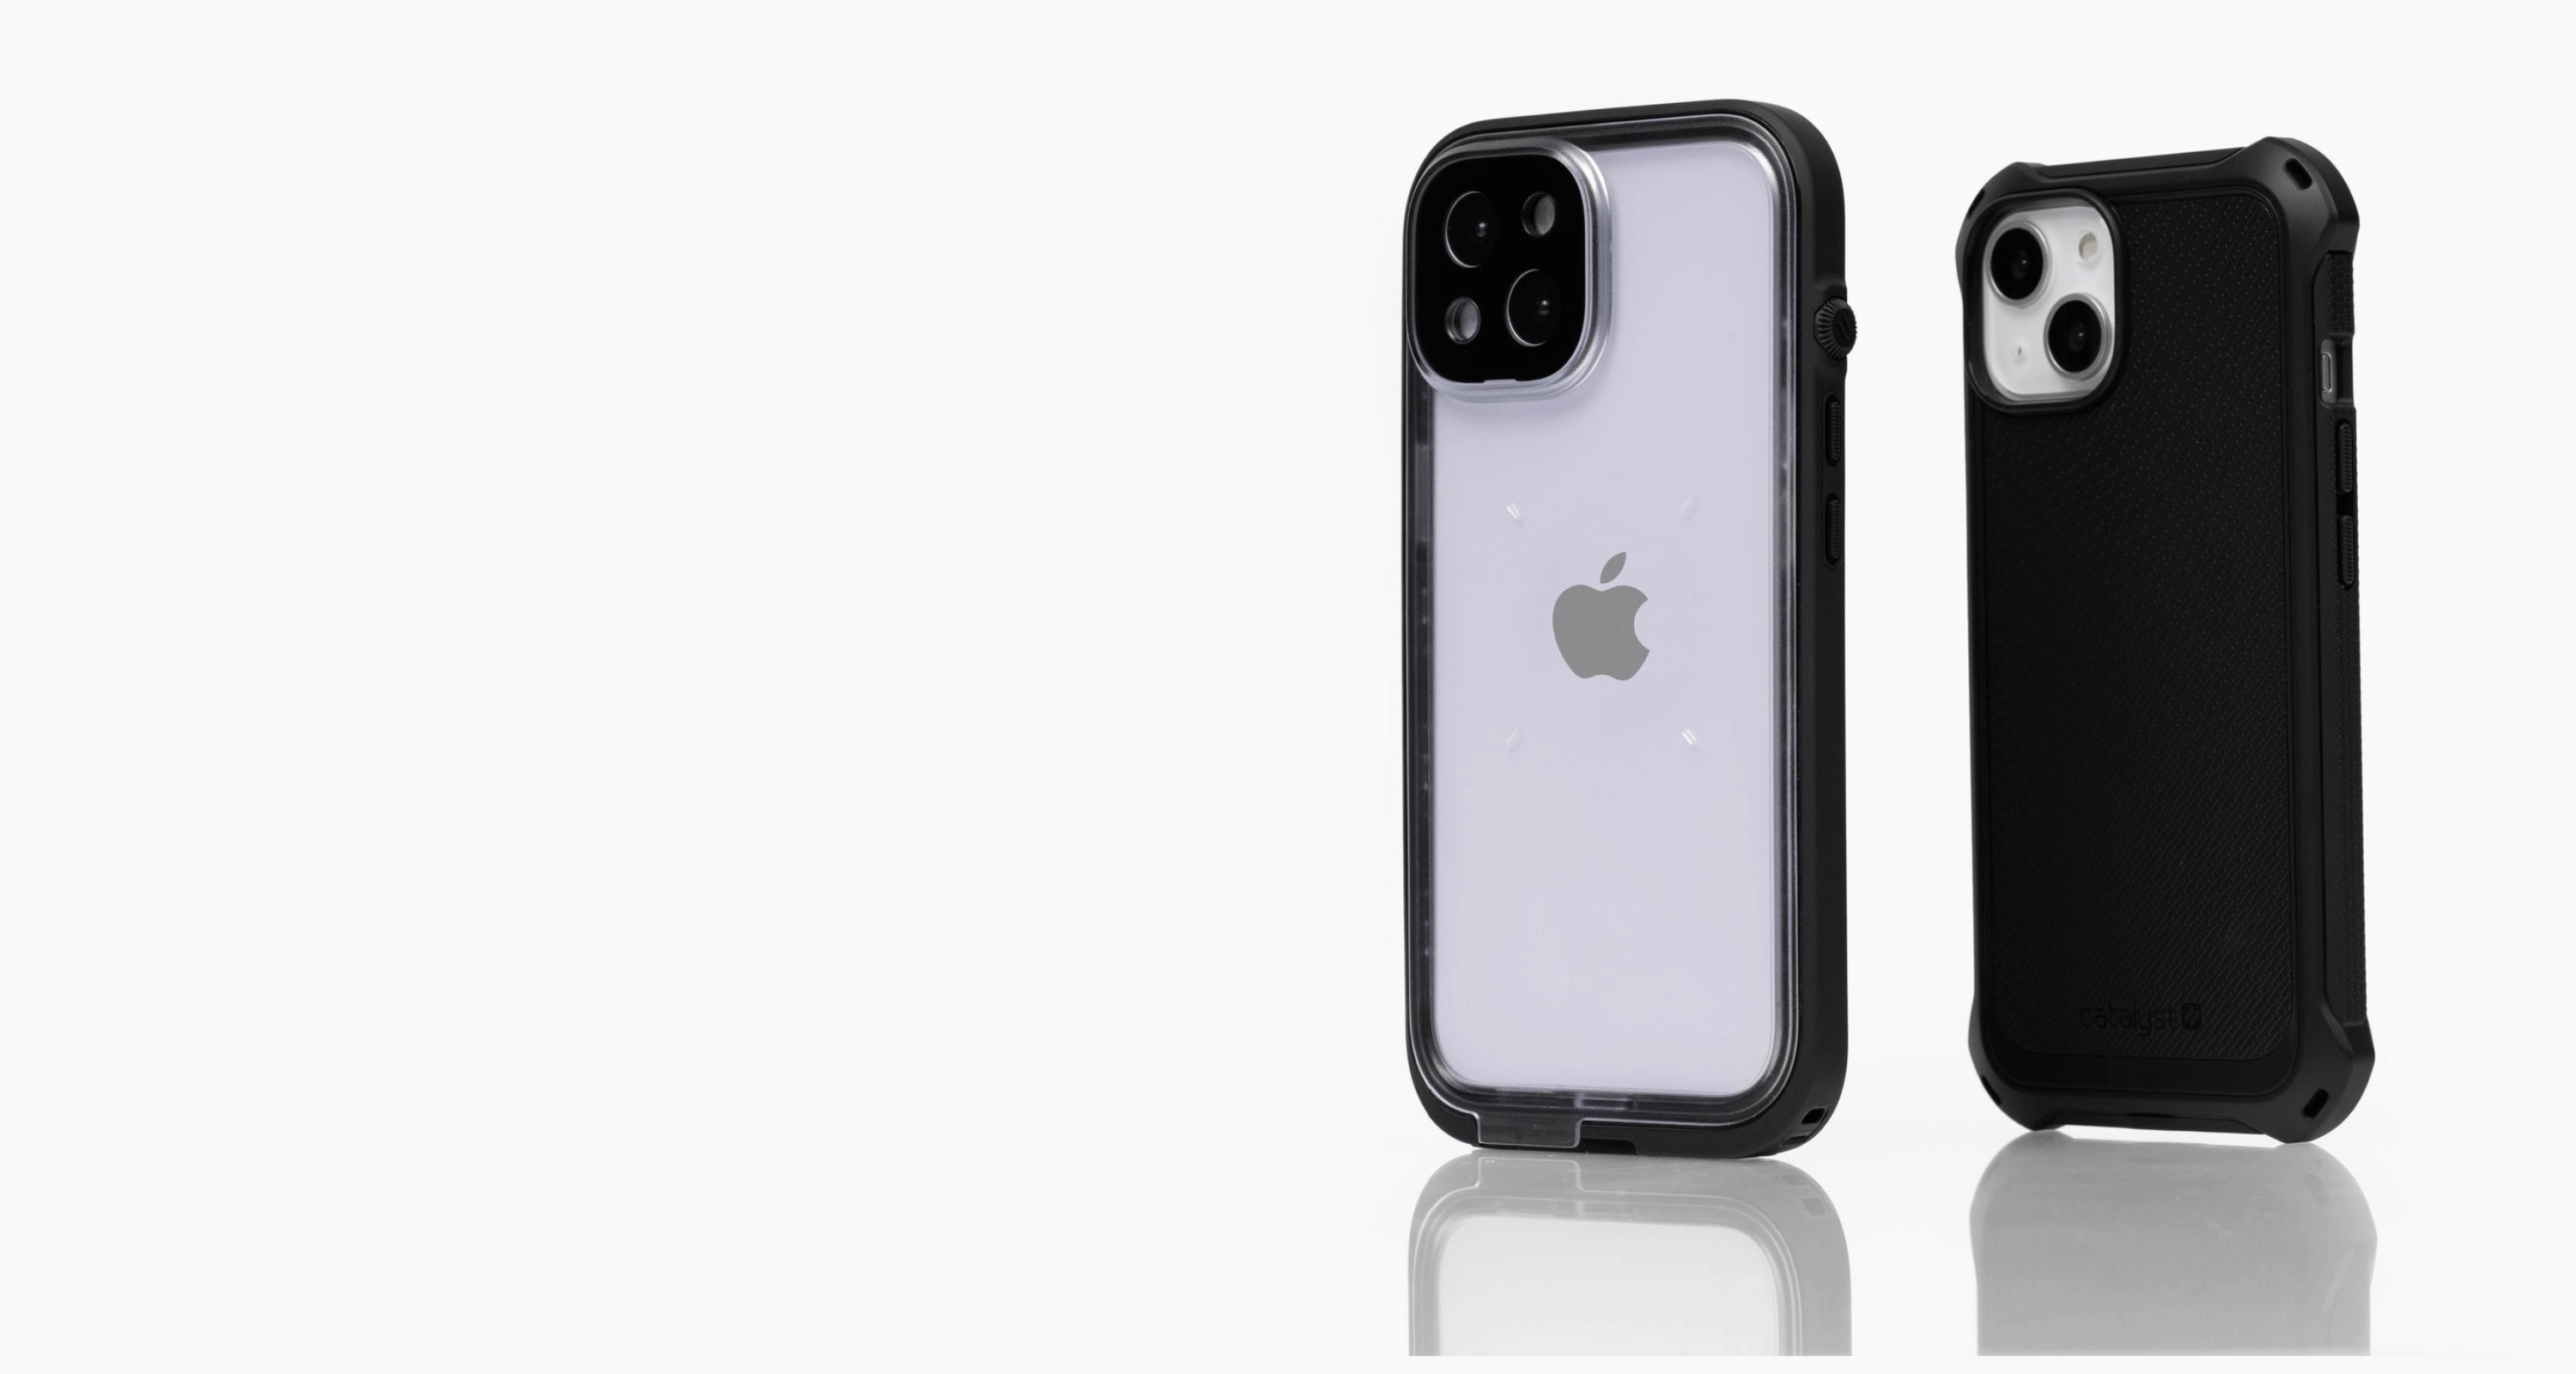  Catalyst Waterproof Total Protection Case for iPhone